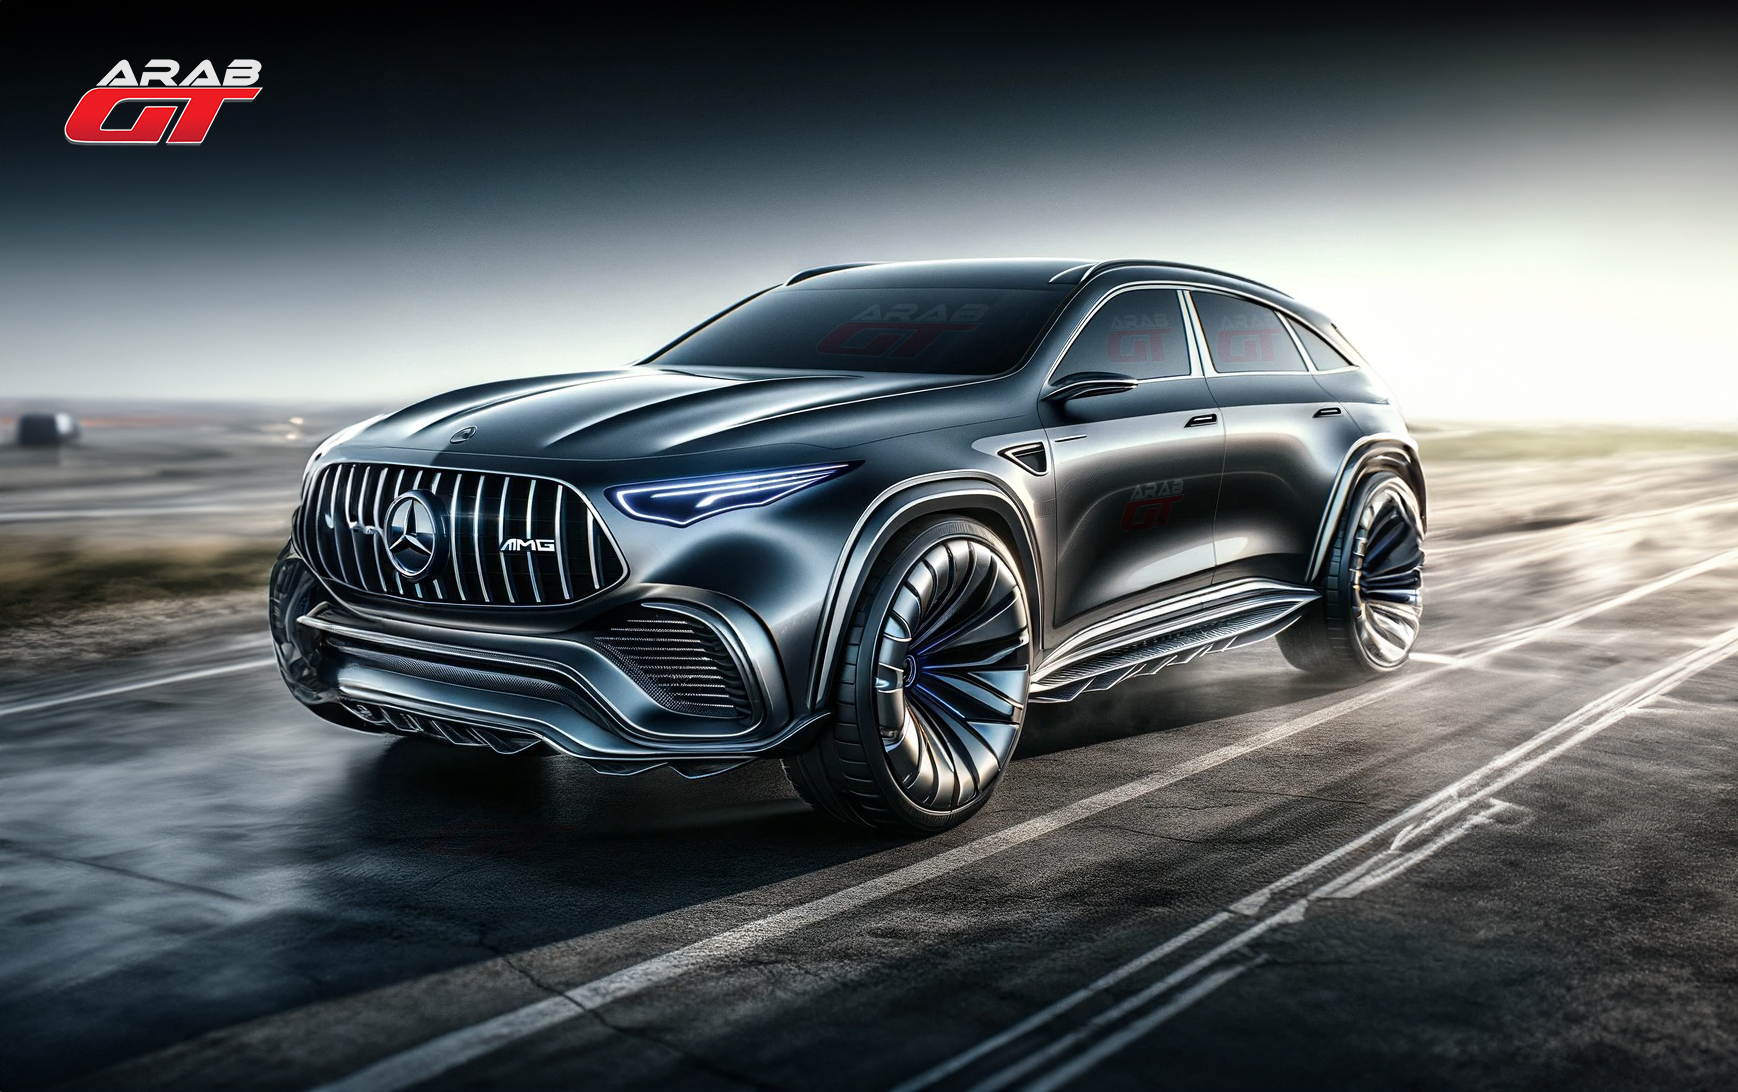 Mercedes to Unveil 1,000+ HP Electric AMG SUV in 2026